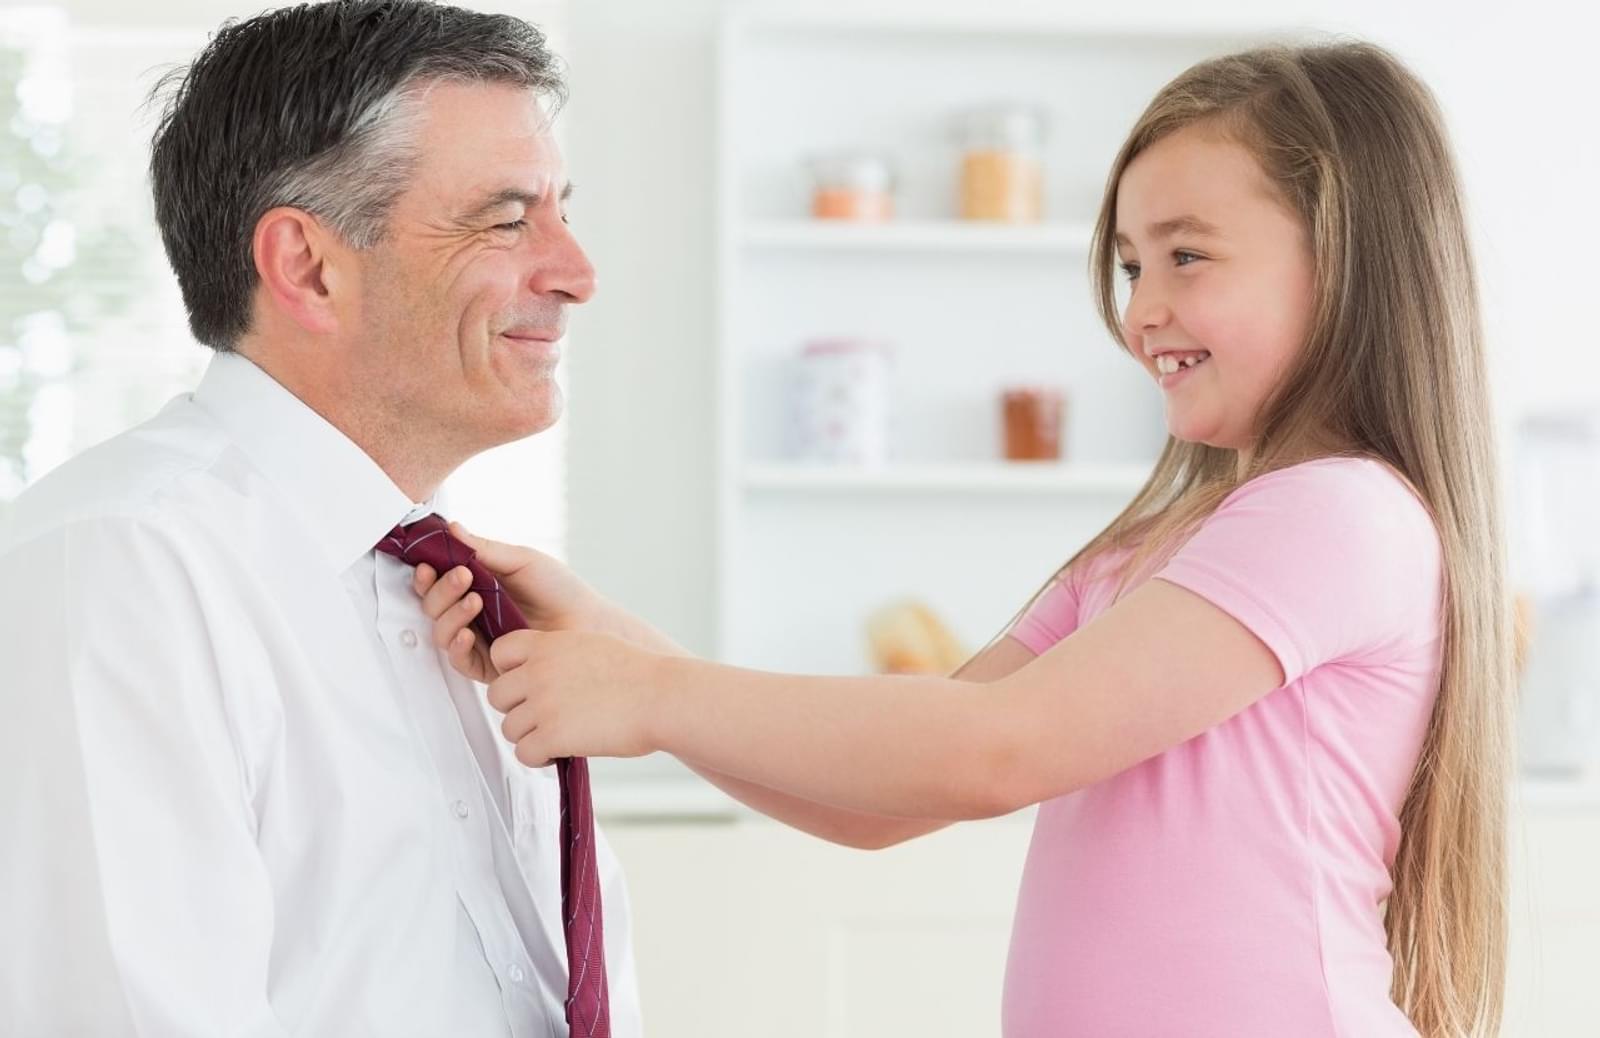 Professional man smiling while young daughter ties his tie